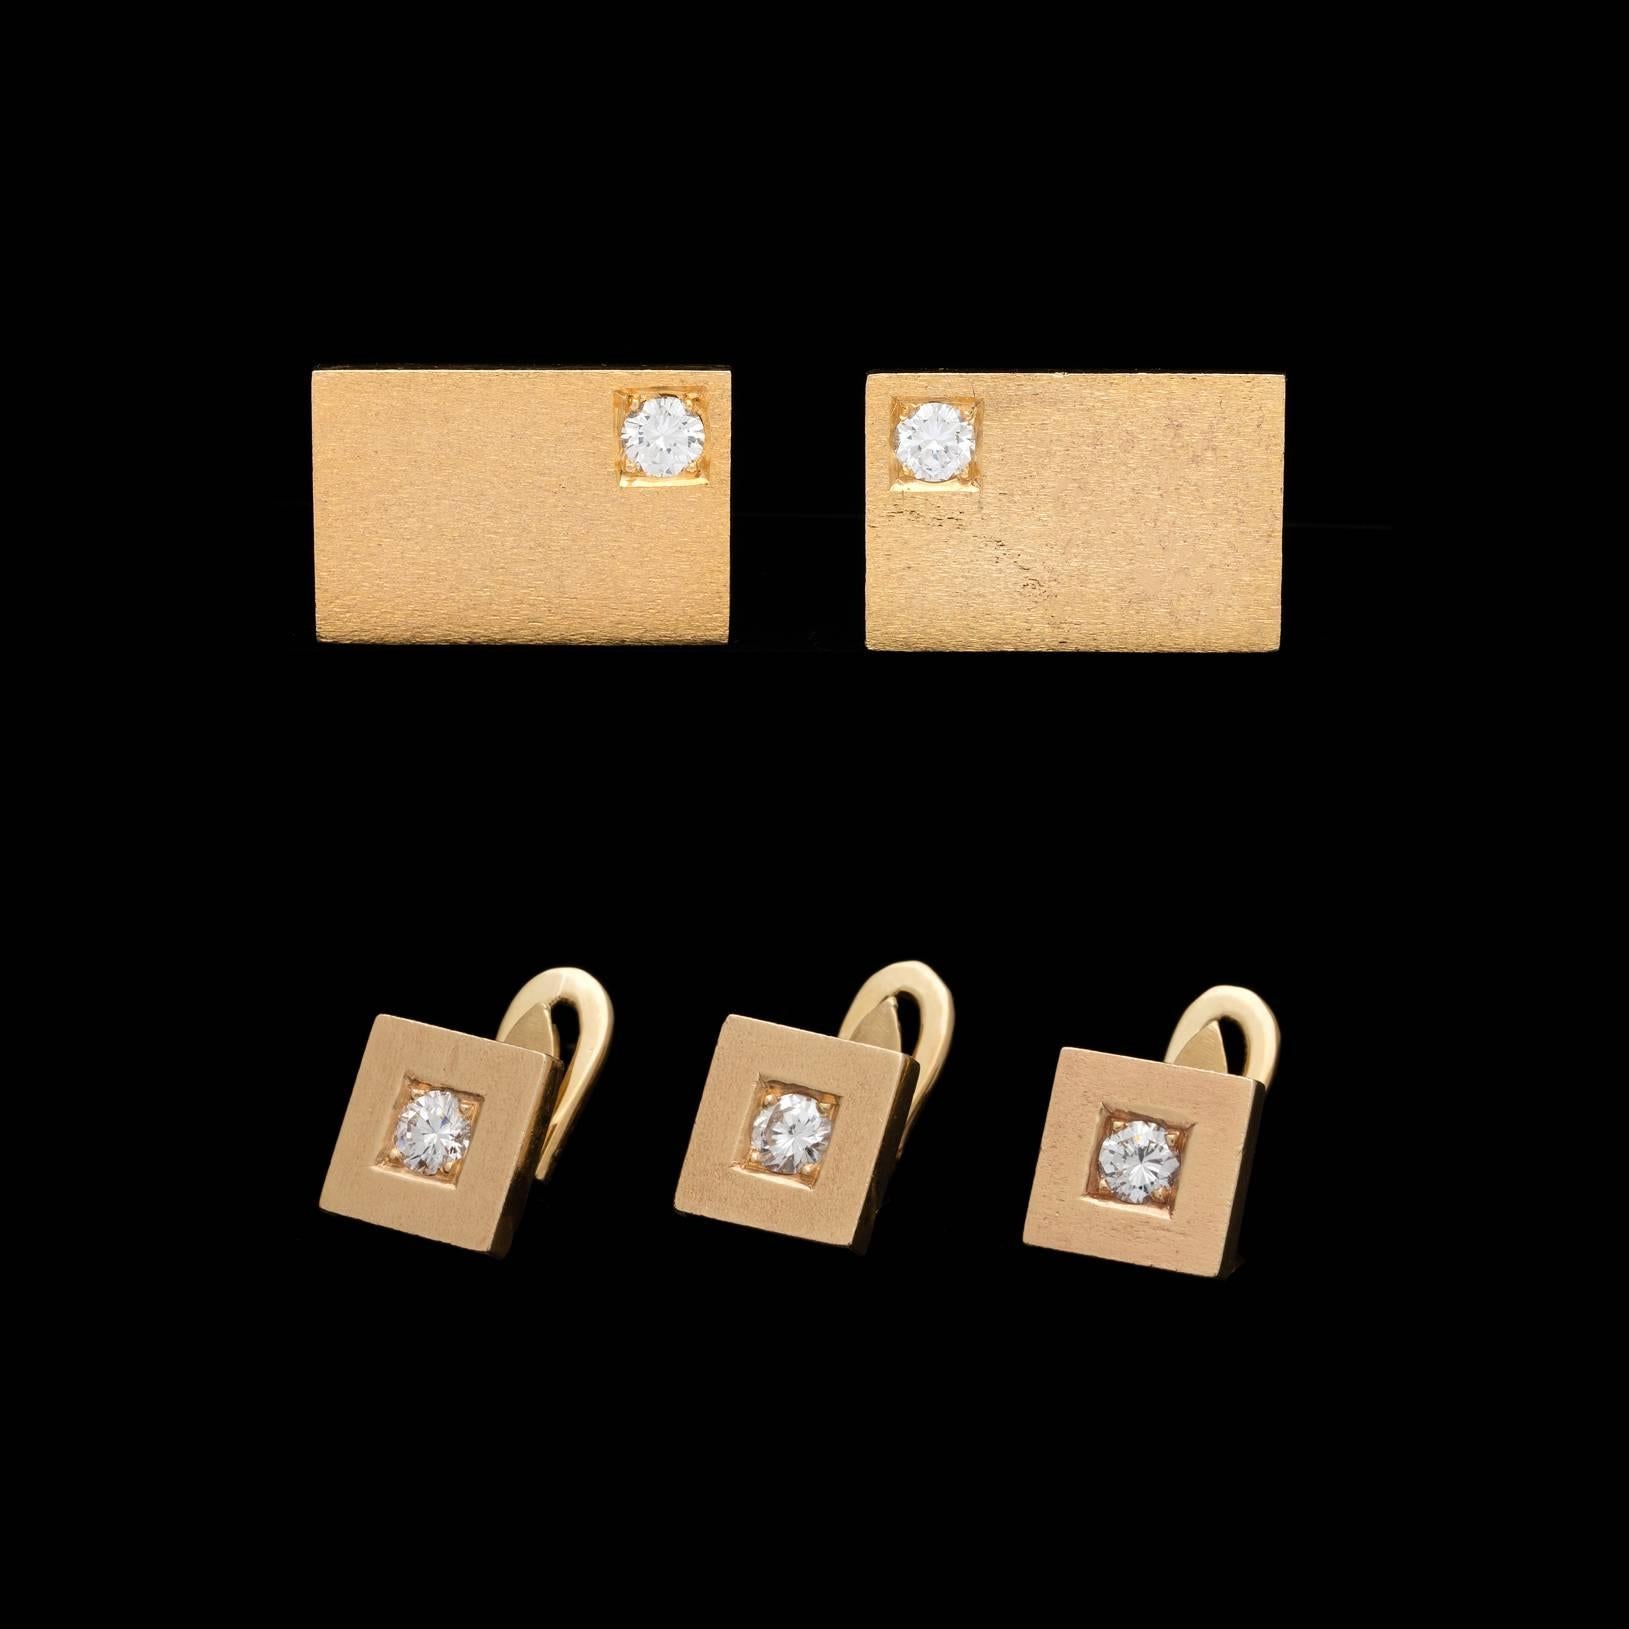 Modern design gentleman's 14k yellow gold cuff links and 3 shirt studs dress set individually detailed with a round brilliant cut diamond for a total of 1.10 carats. This 5-piece set is handsomely detailed with a textured finish. The cuff link